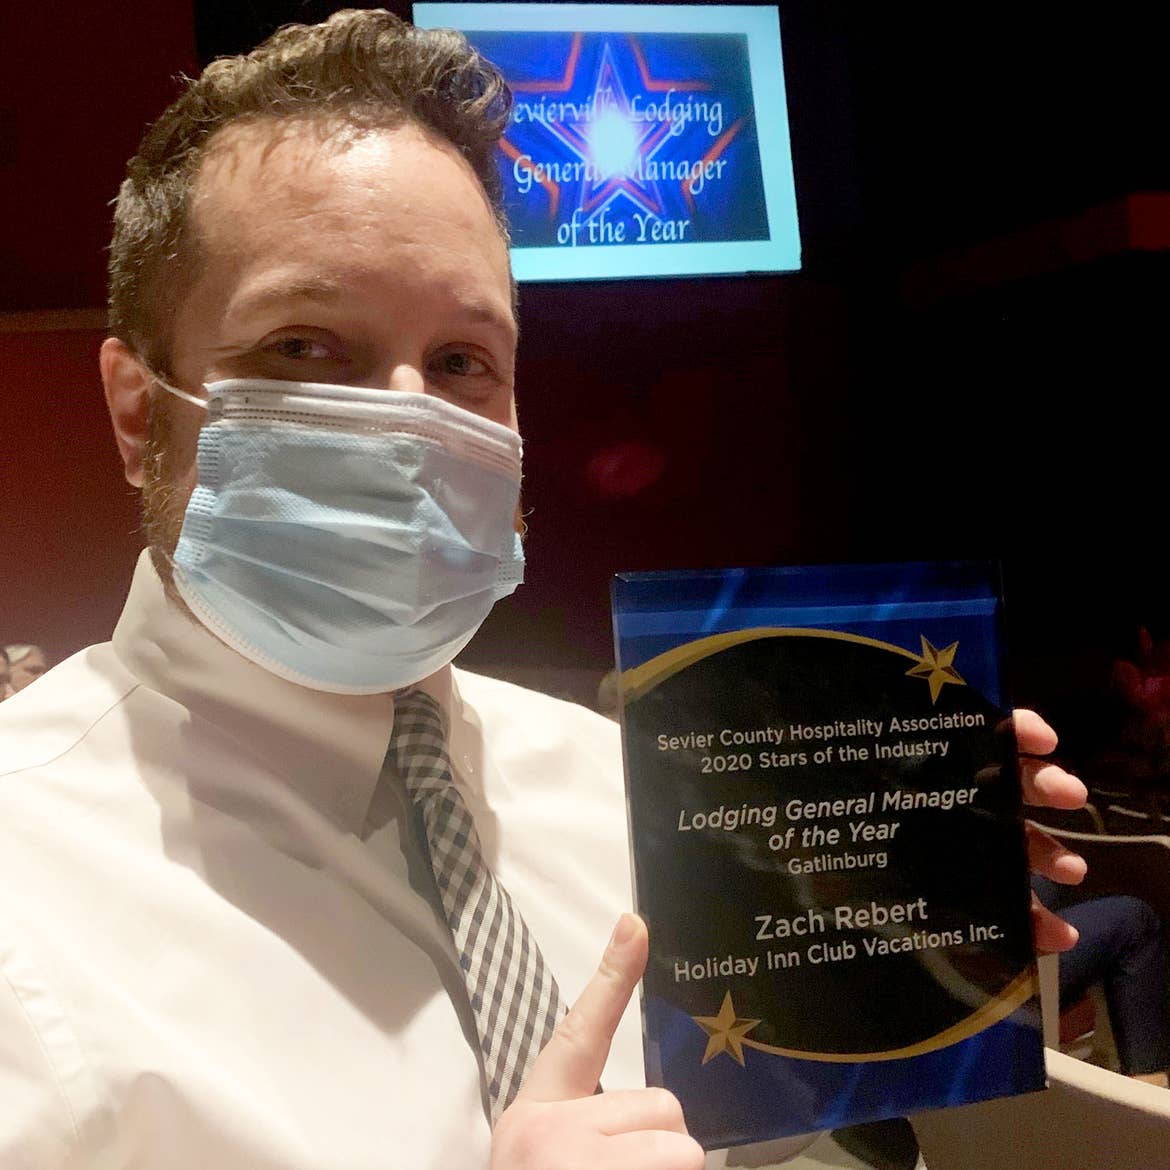 HICV general Manager, Zach Rebert, wears a mask while holding his 'Lodging General Manager of the Year' award.